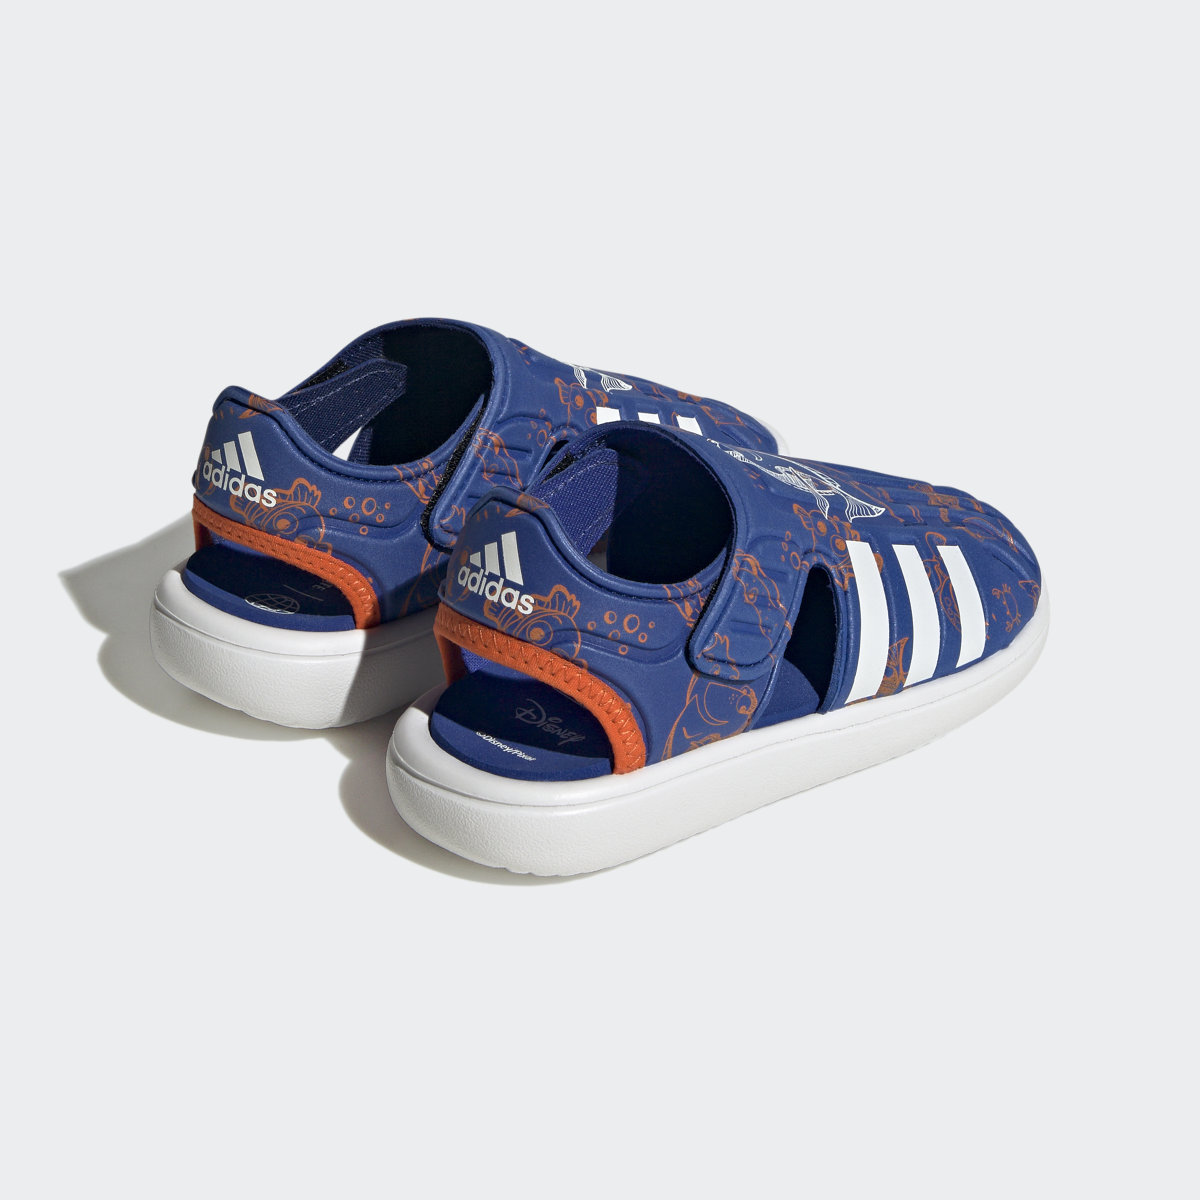 Adidas Finding Nemo and Dory Closed Toe Summer Sandalet. 6